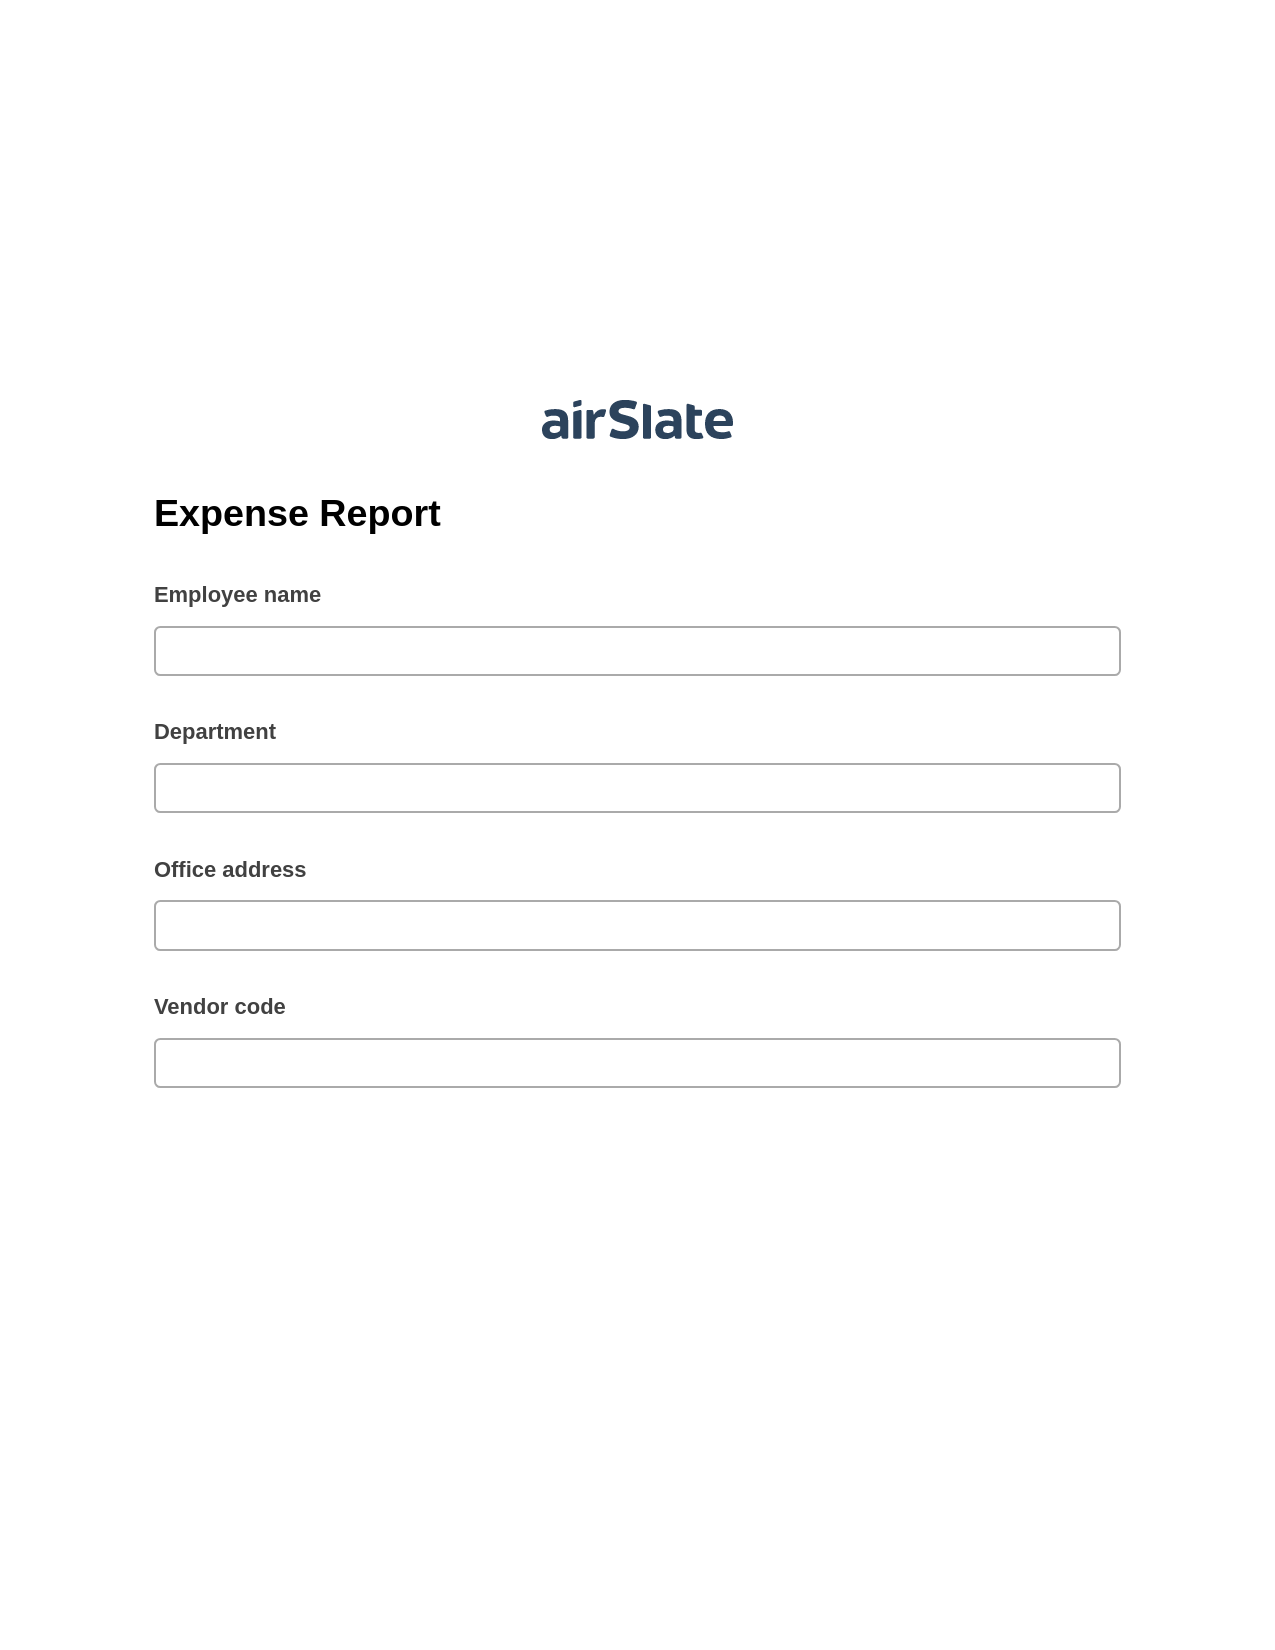 Expense Report Pre-fill Slate from MS Dynamics 365 Records Bot, Revoke Access Bot, Export to NetSuite Record Bot